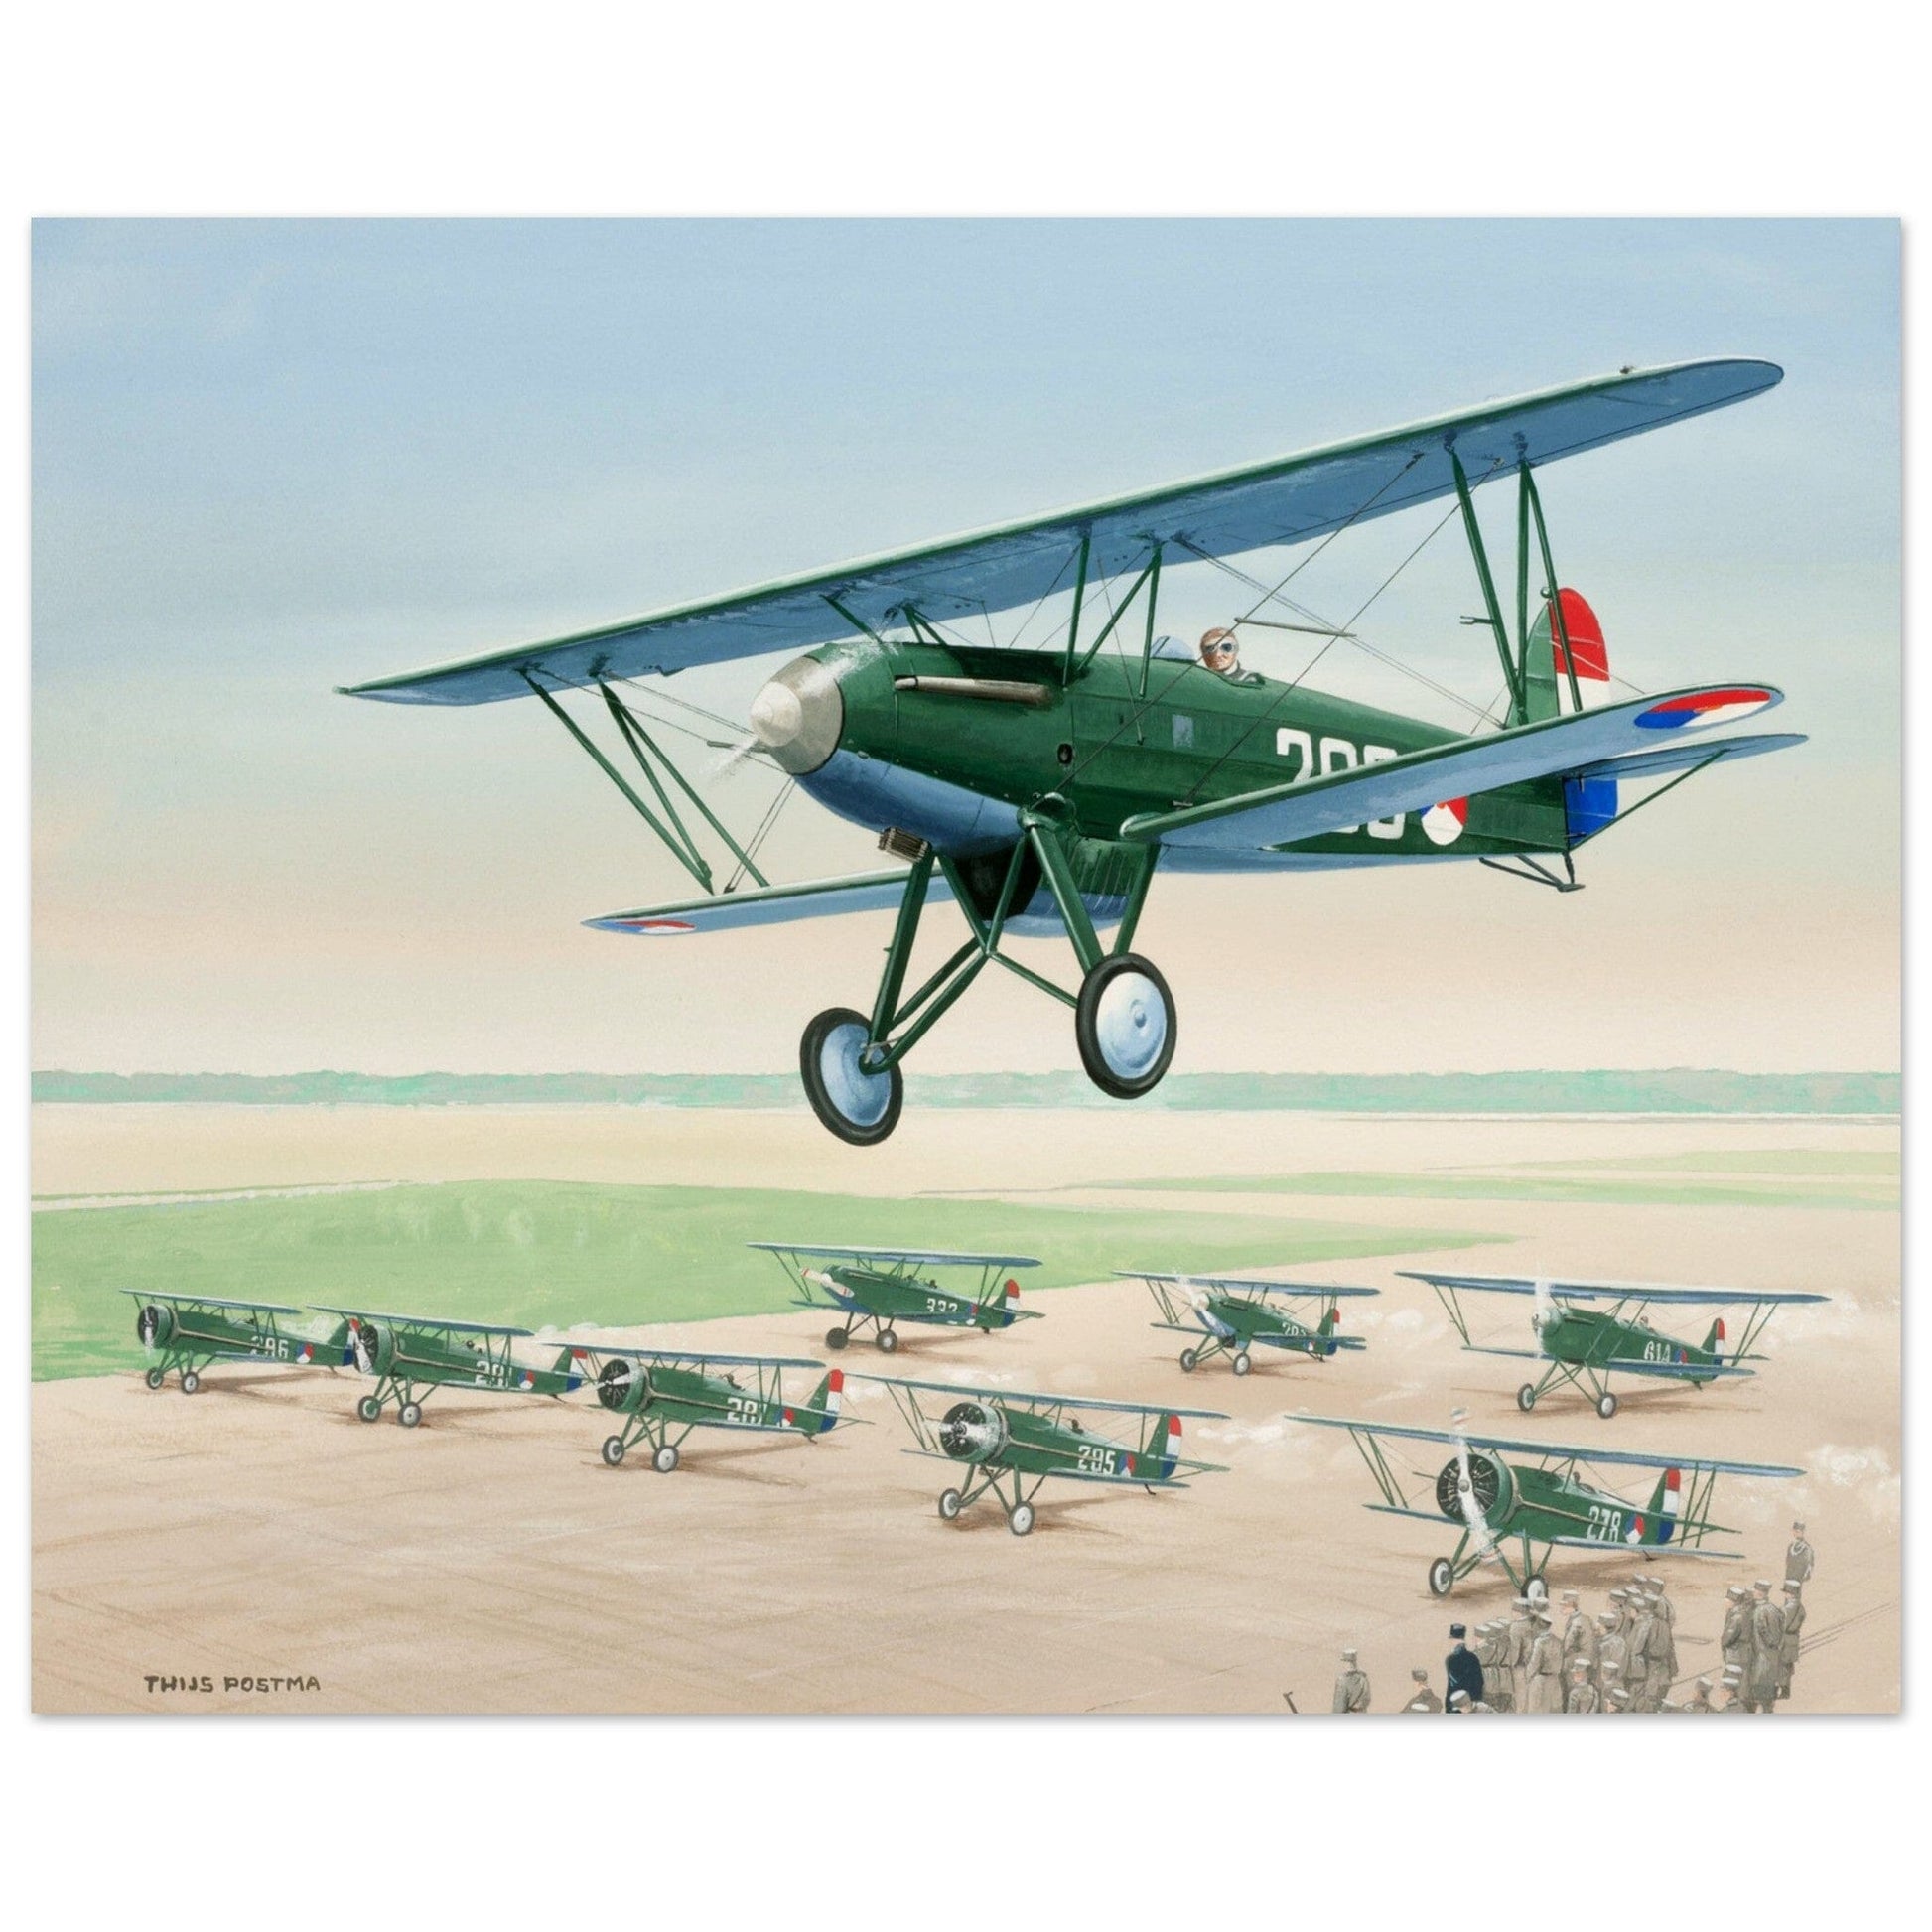 Thijs Postma - Poster - Fokker D.XVII Lined Up Poster Only TP Aviation Art 40x50 cm / 16x20″ 